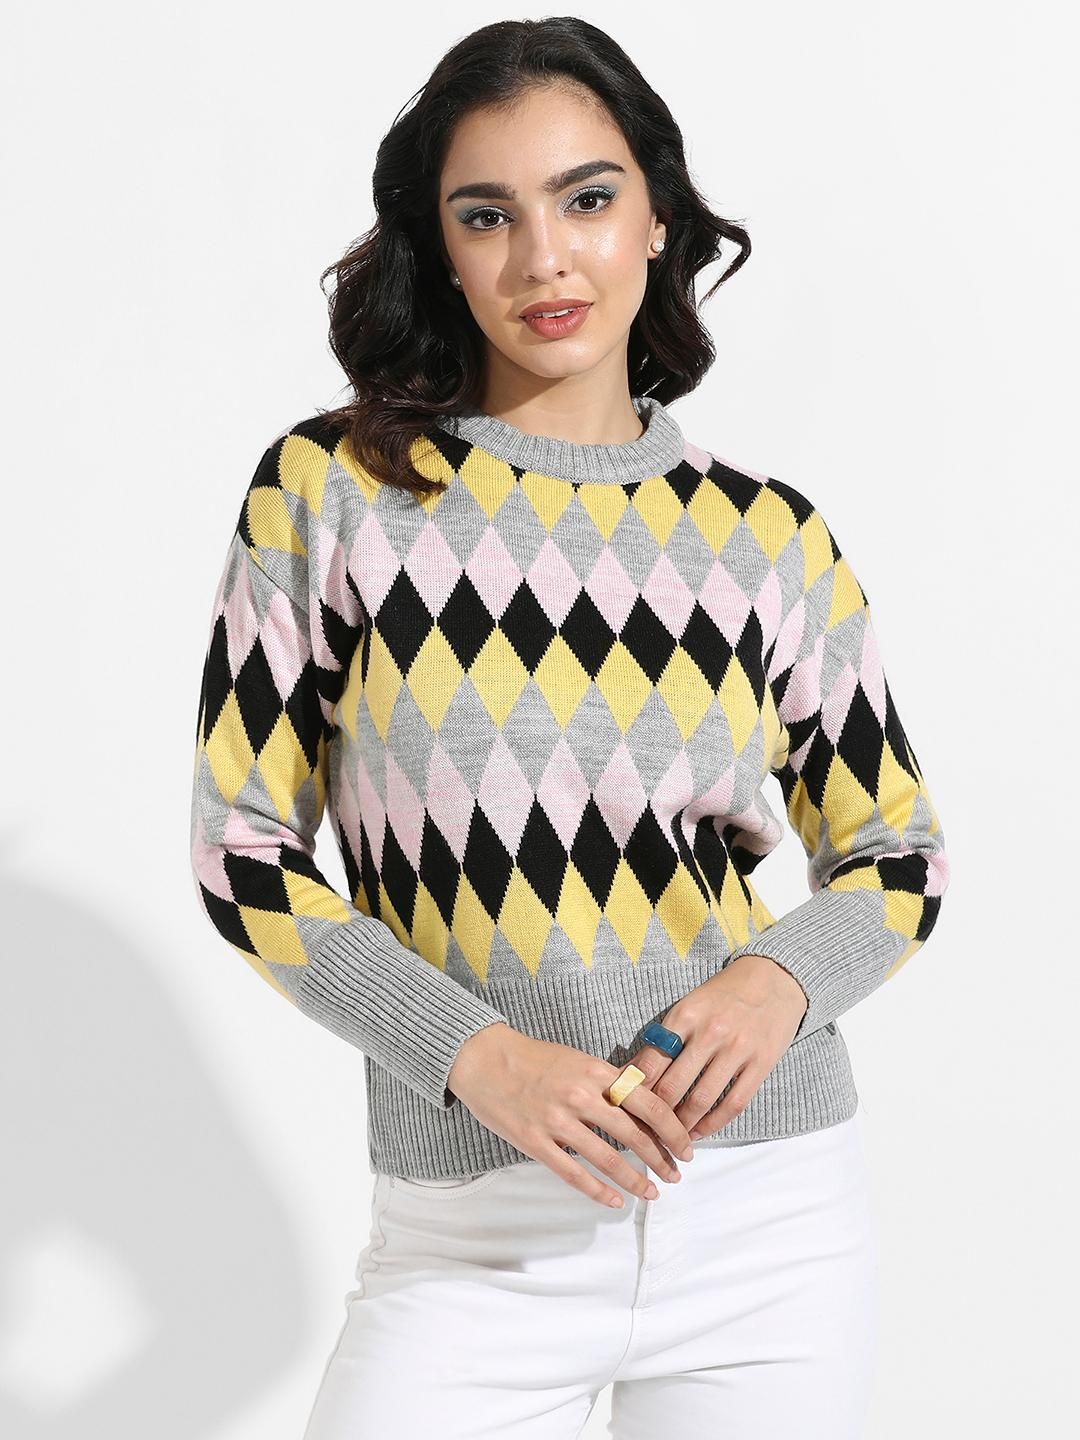 Campus Sutra Women's Argyle Knitted Pullover Sweater 